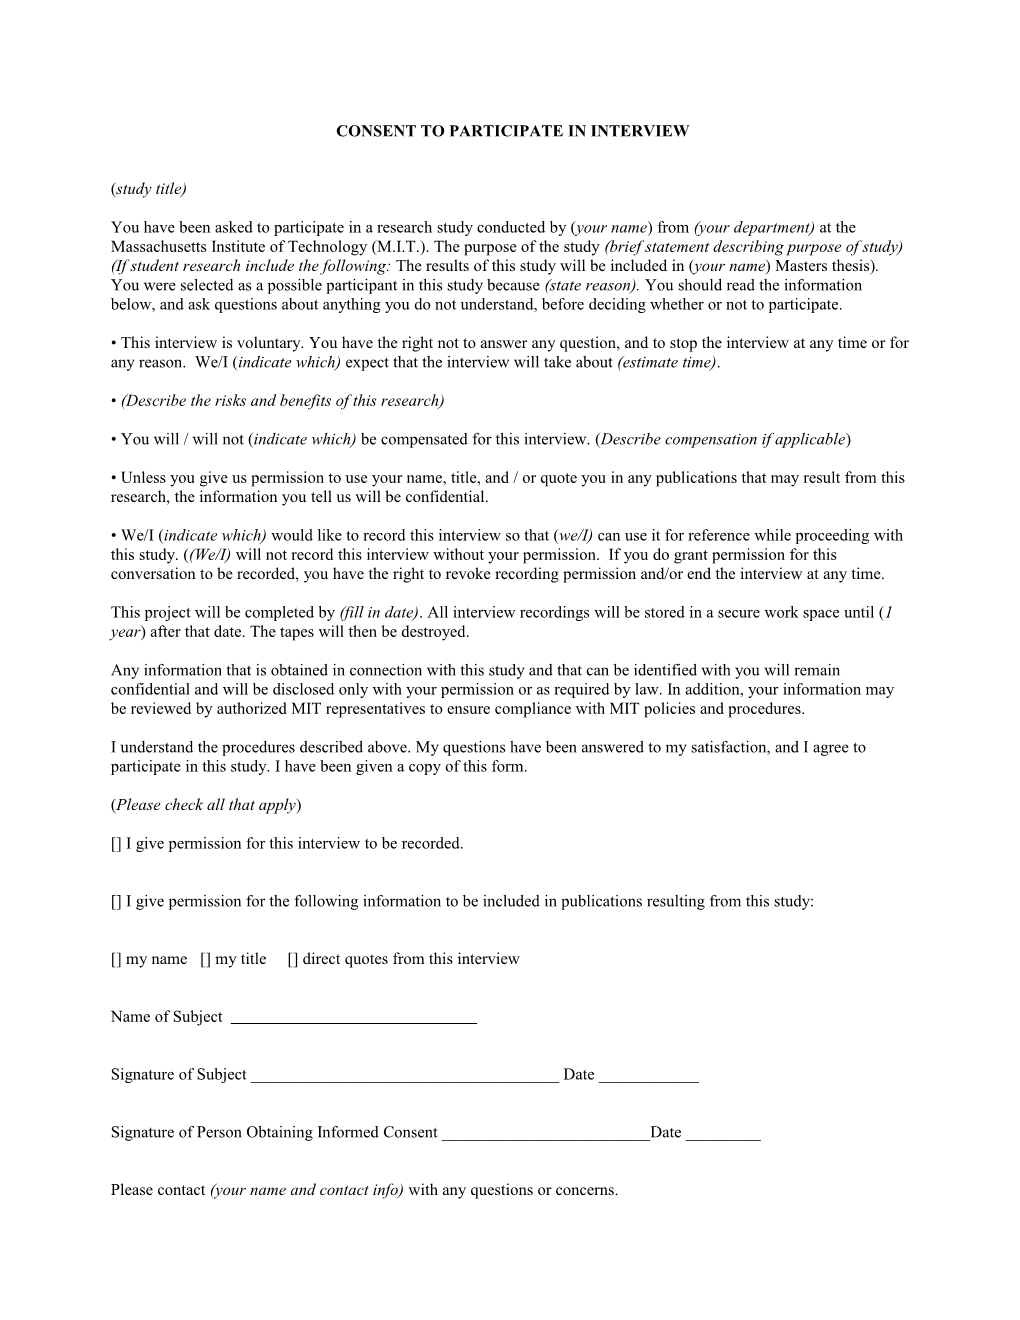 Consent to Participate in Interview